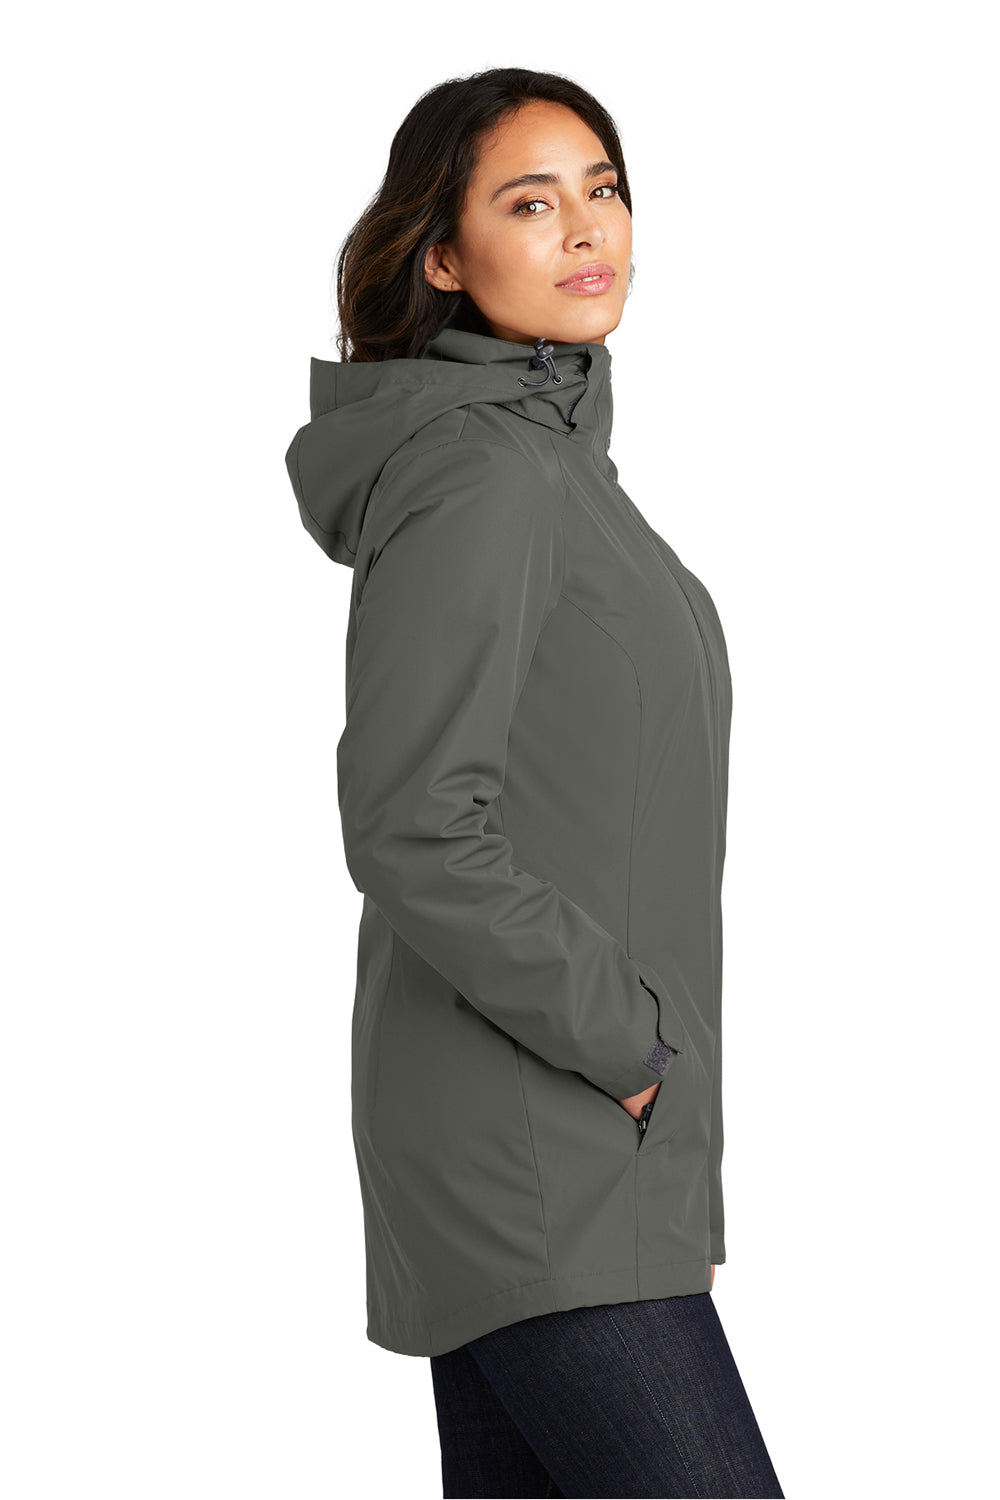 Port Authority L123 Womens All Weather 3 in 1 Full Zip Hooded Jacket Storm Grey Side